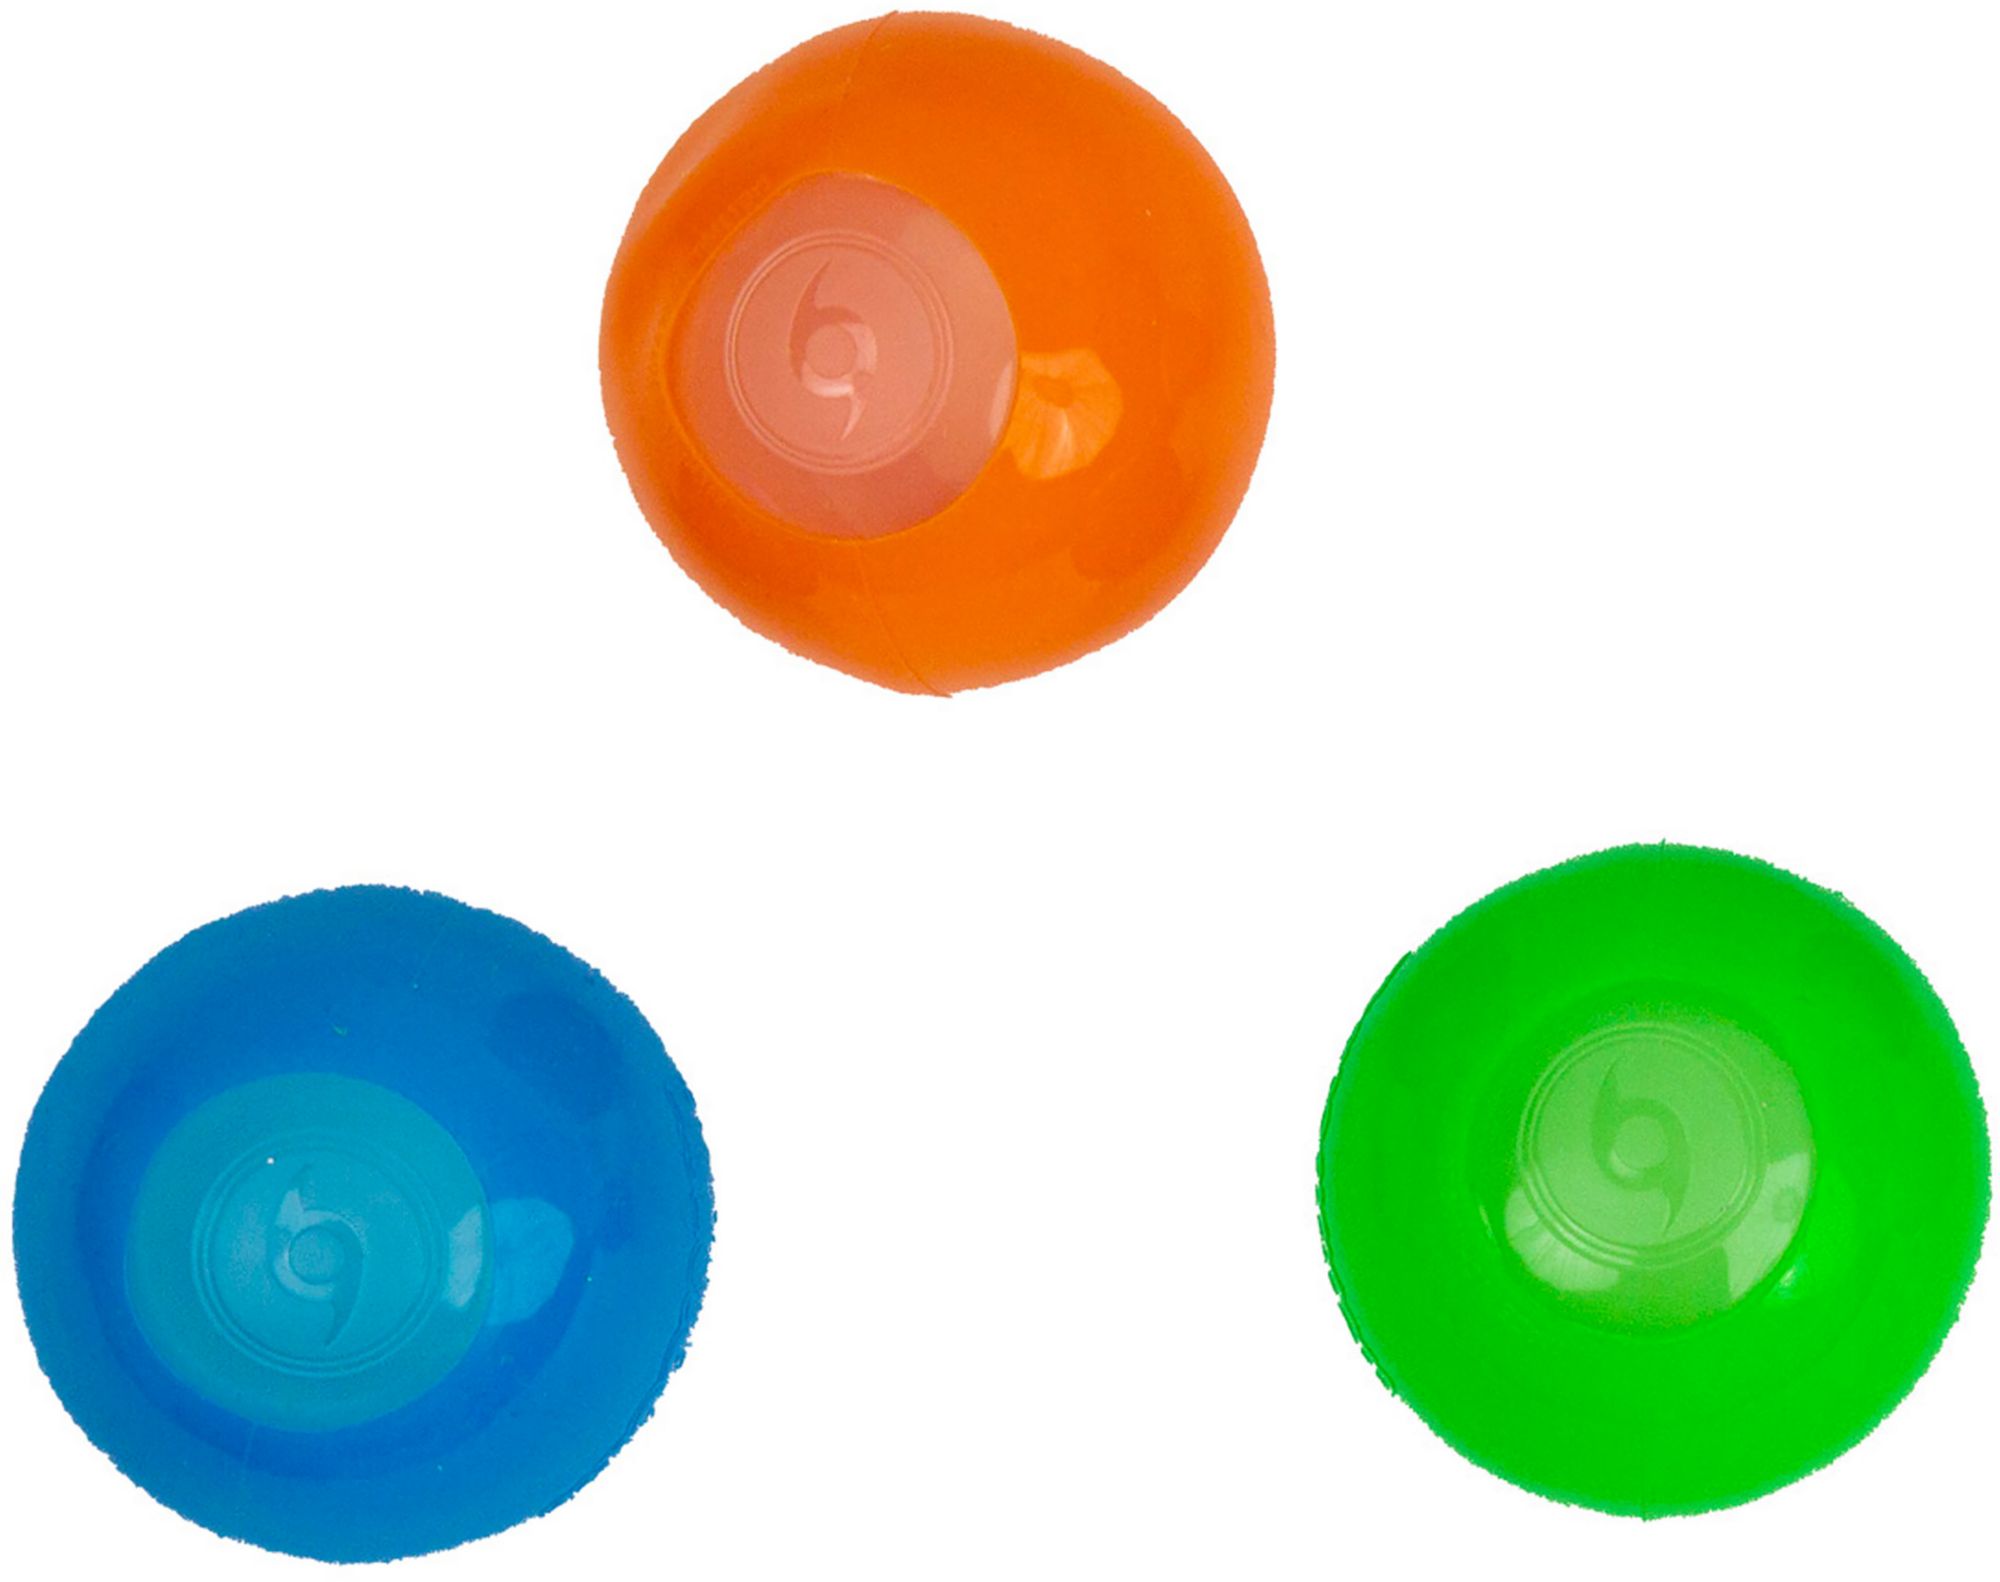 Prime Time Toys Hurricane Reusable Silicone Water Balls for Kids – 3 Pack